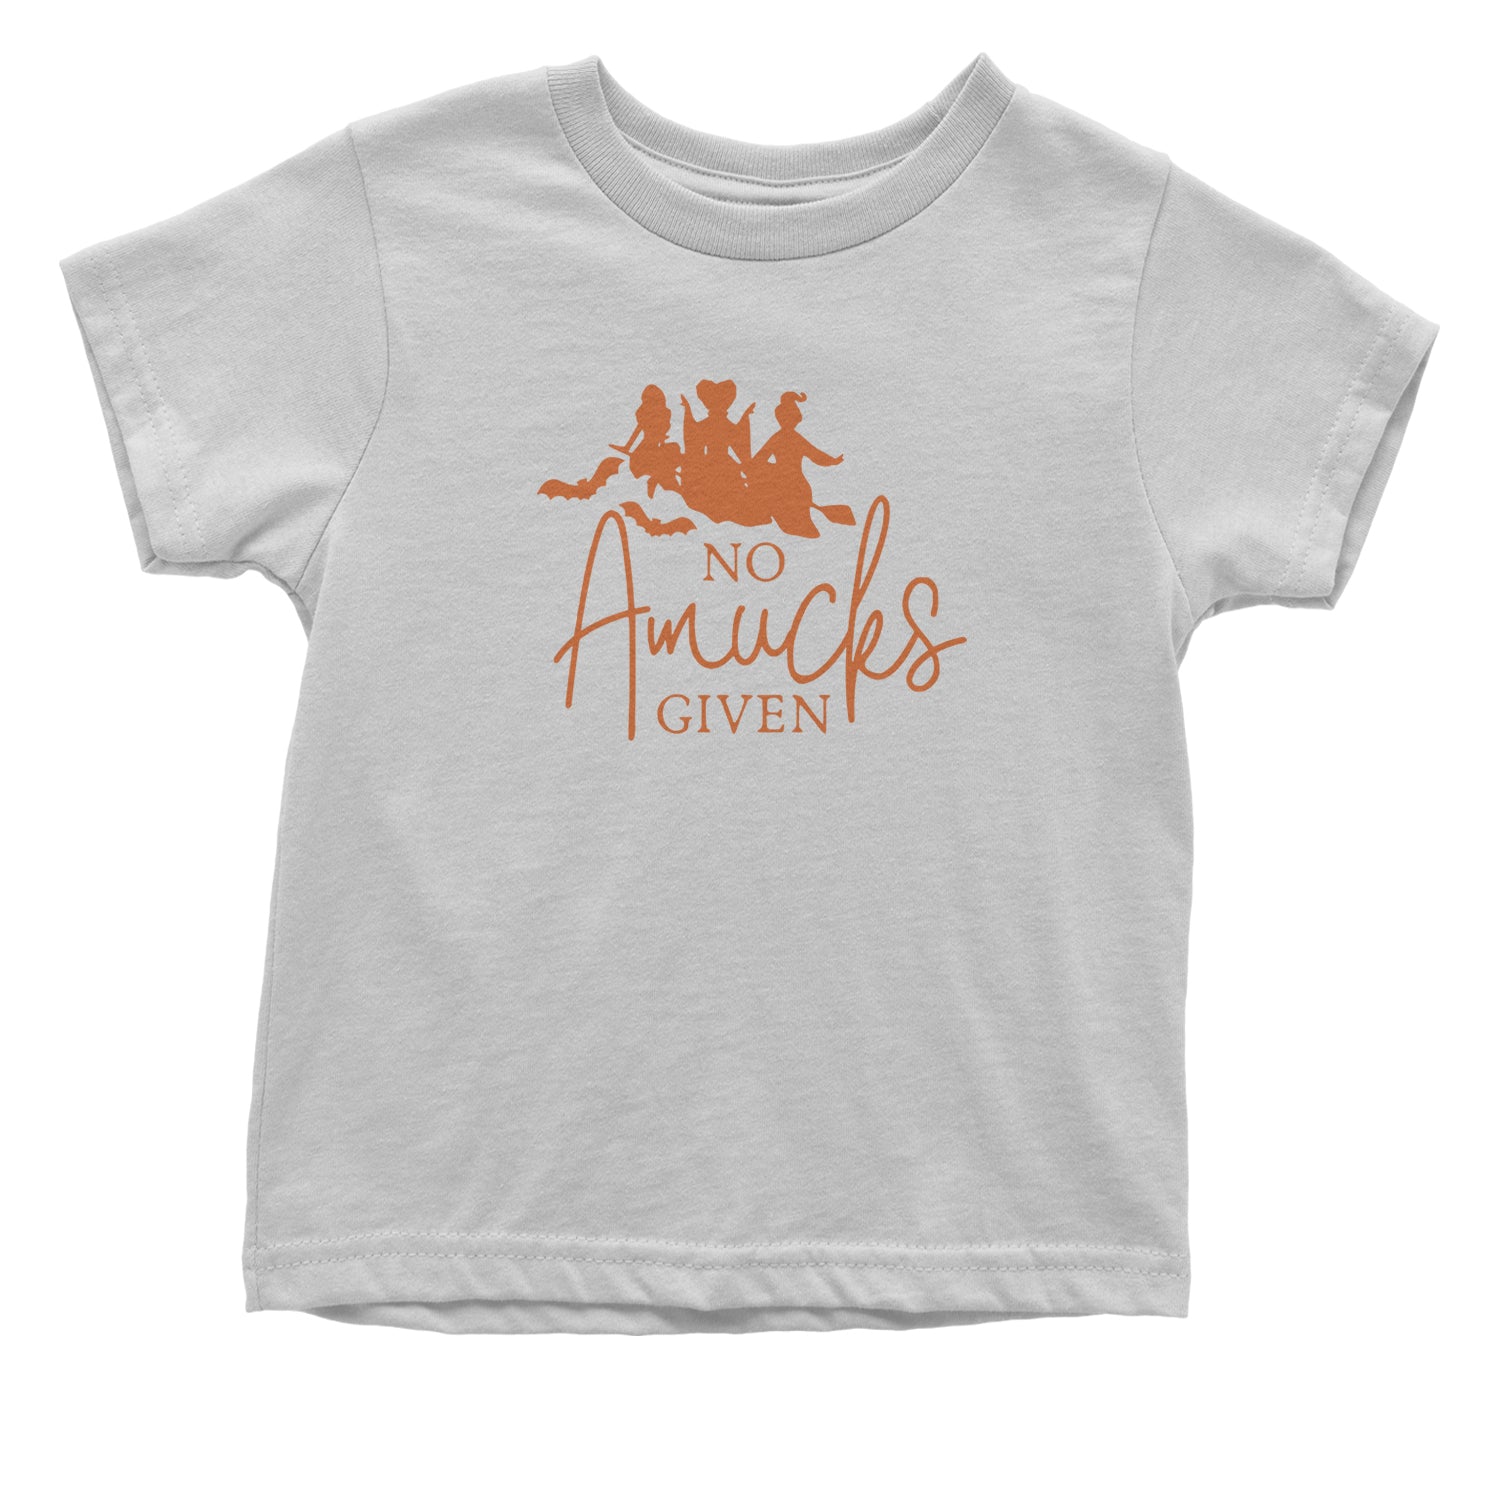 No Amucks Given Hocus Pocus Infant One-Piece Romper Bodysuit and Toddler T-shirt descendants, enchanted, eve, hallows, hocus, or, pocus, sanderson, sisters, treat, trick, witches by Expression Tees